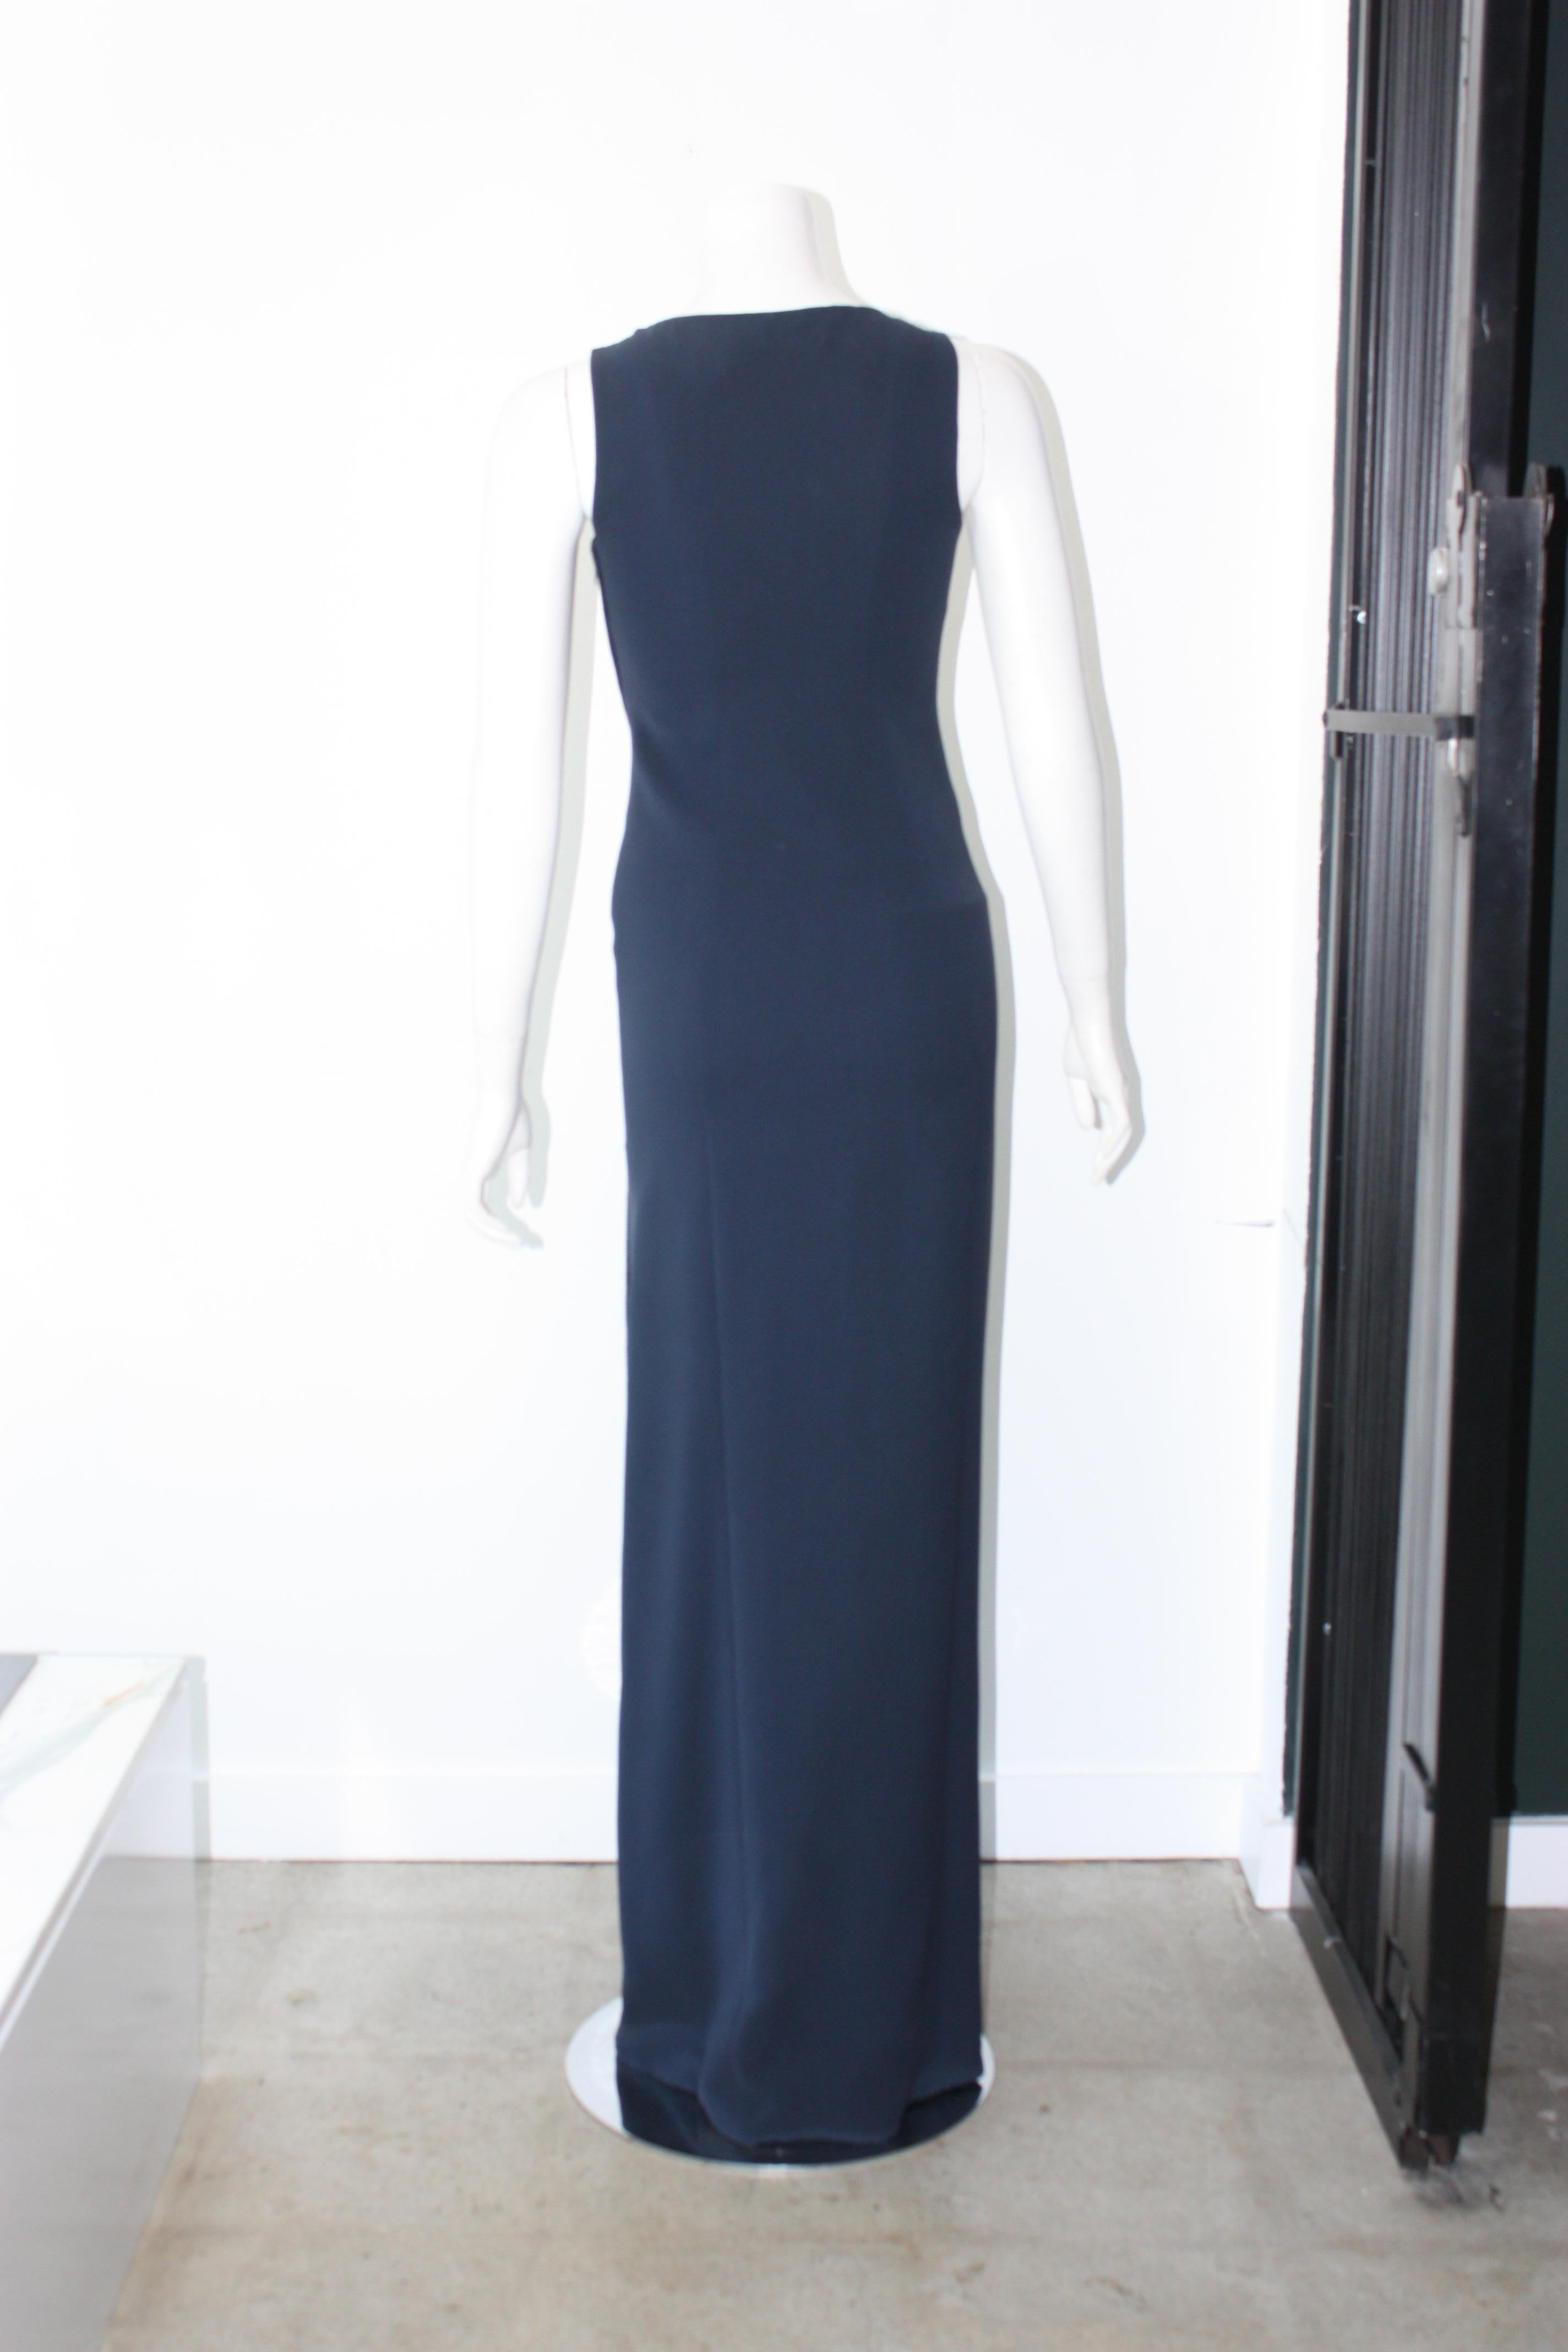 Versace navy evening gown with contrasting silk cowl neck chest and navy blue beads down the side. Side leg zipper.

Size 38
Silk, acetate, viscose bend